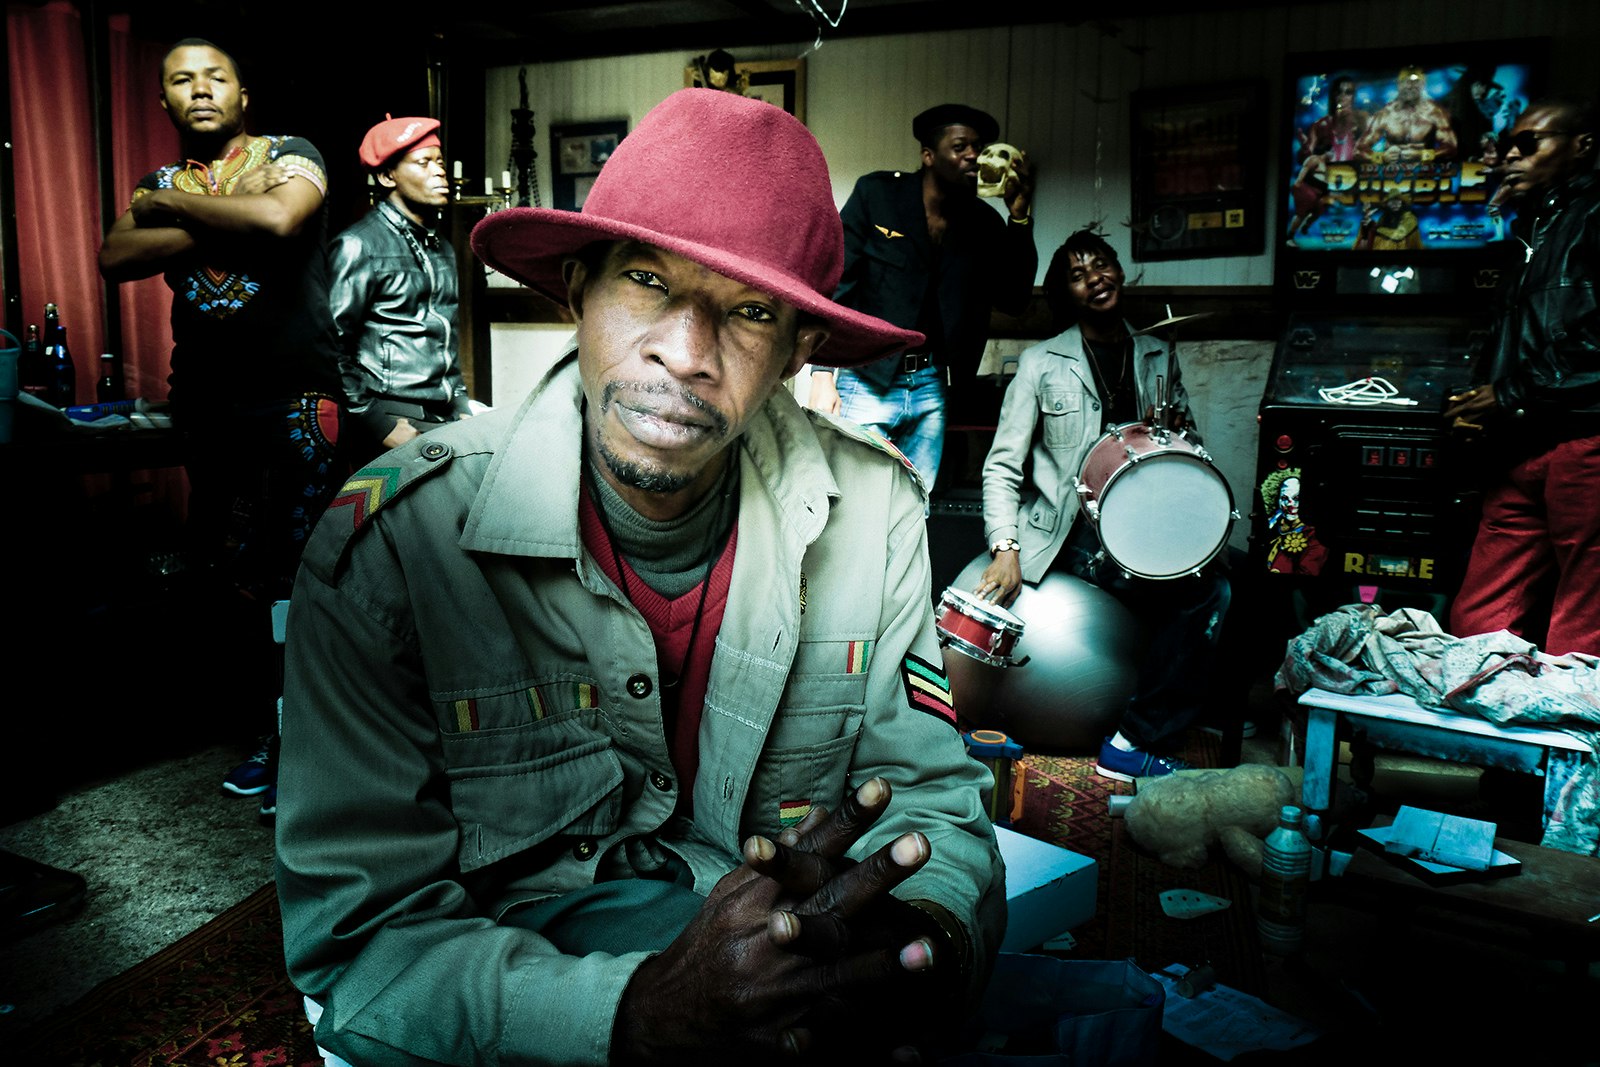 A man wearing a wide-brimmed red hat sits close to the camera, surrounded by his bandmates in various poses 